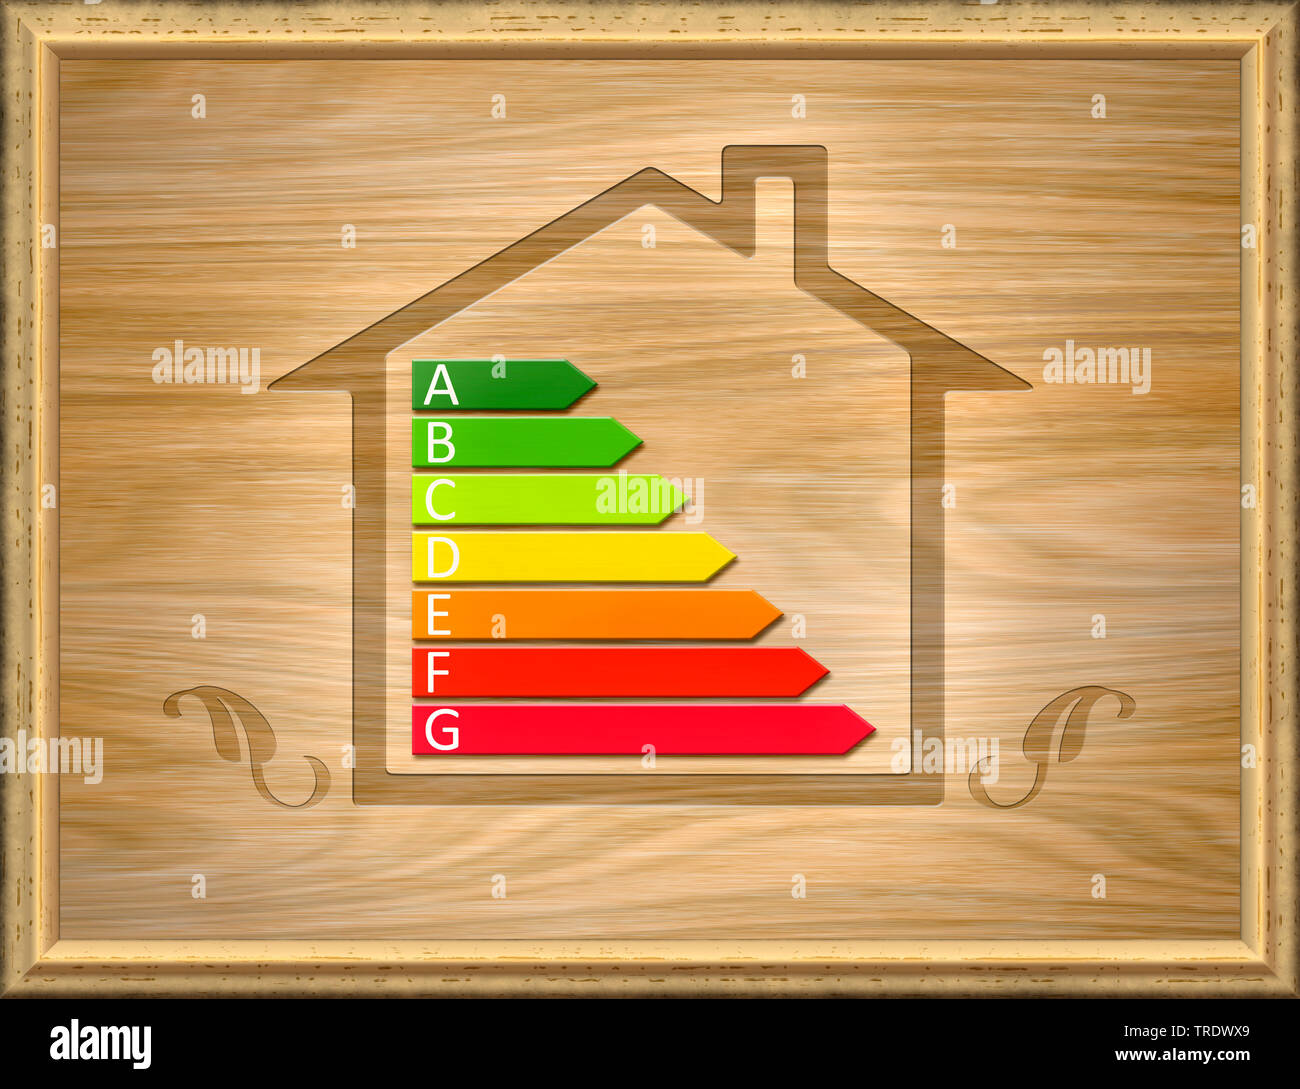 Sign of European Union energy label for a residental house against background out of wood veneer Stock Photo